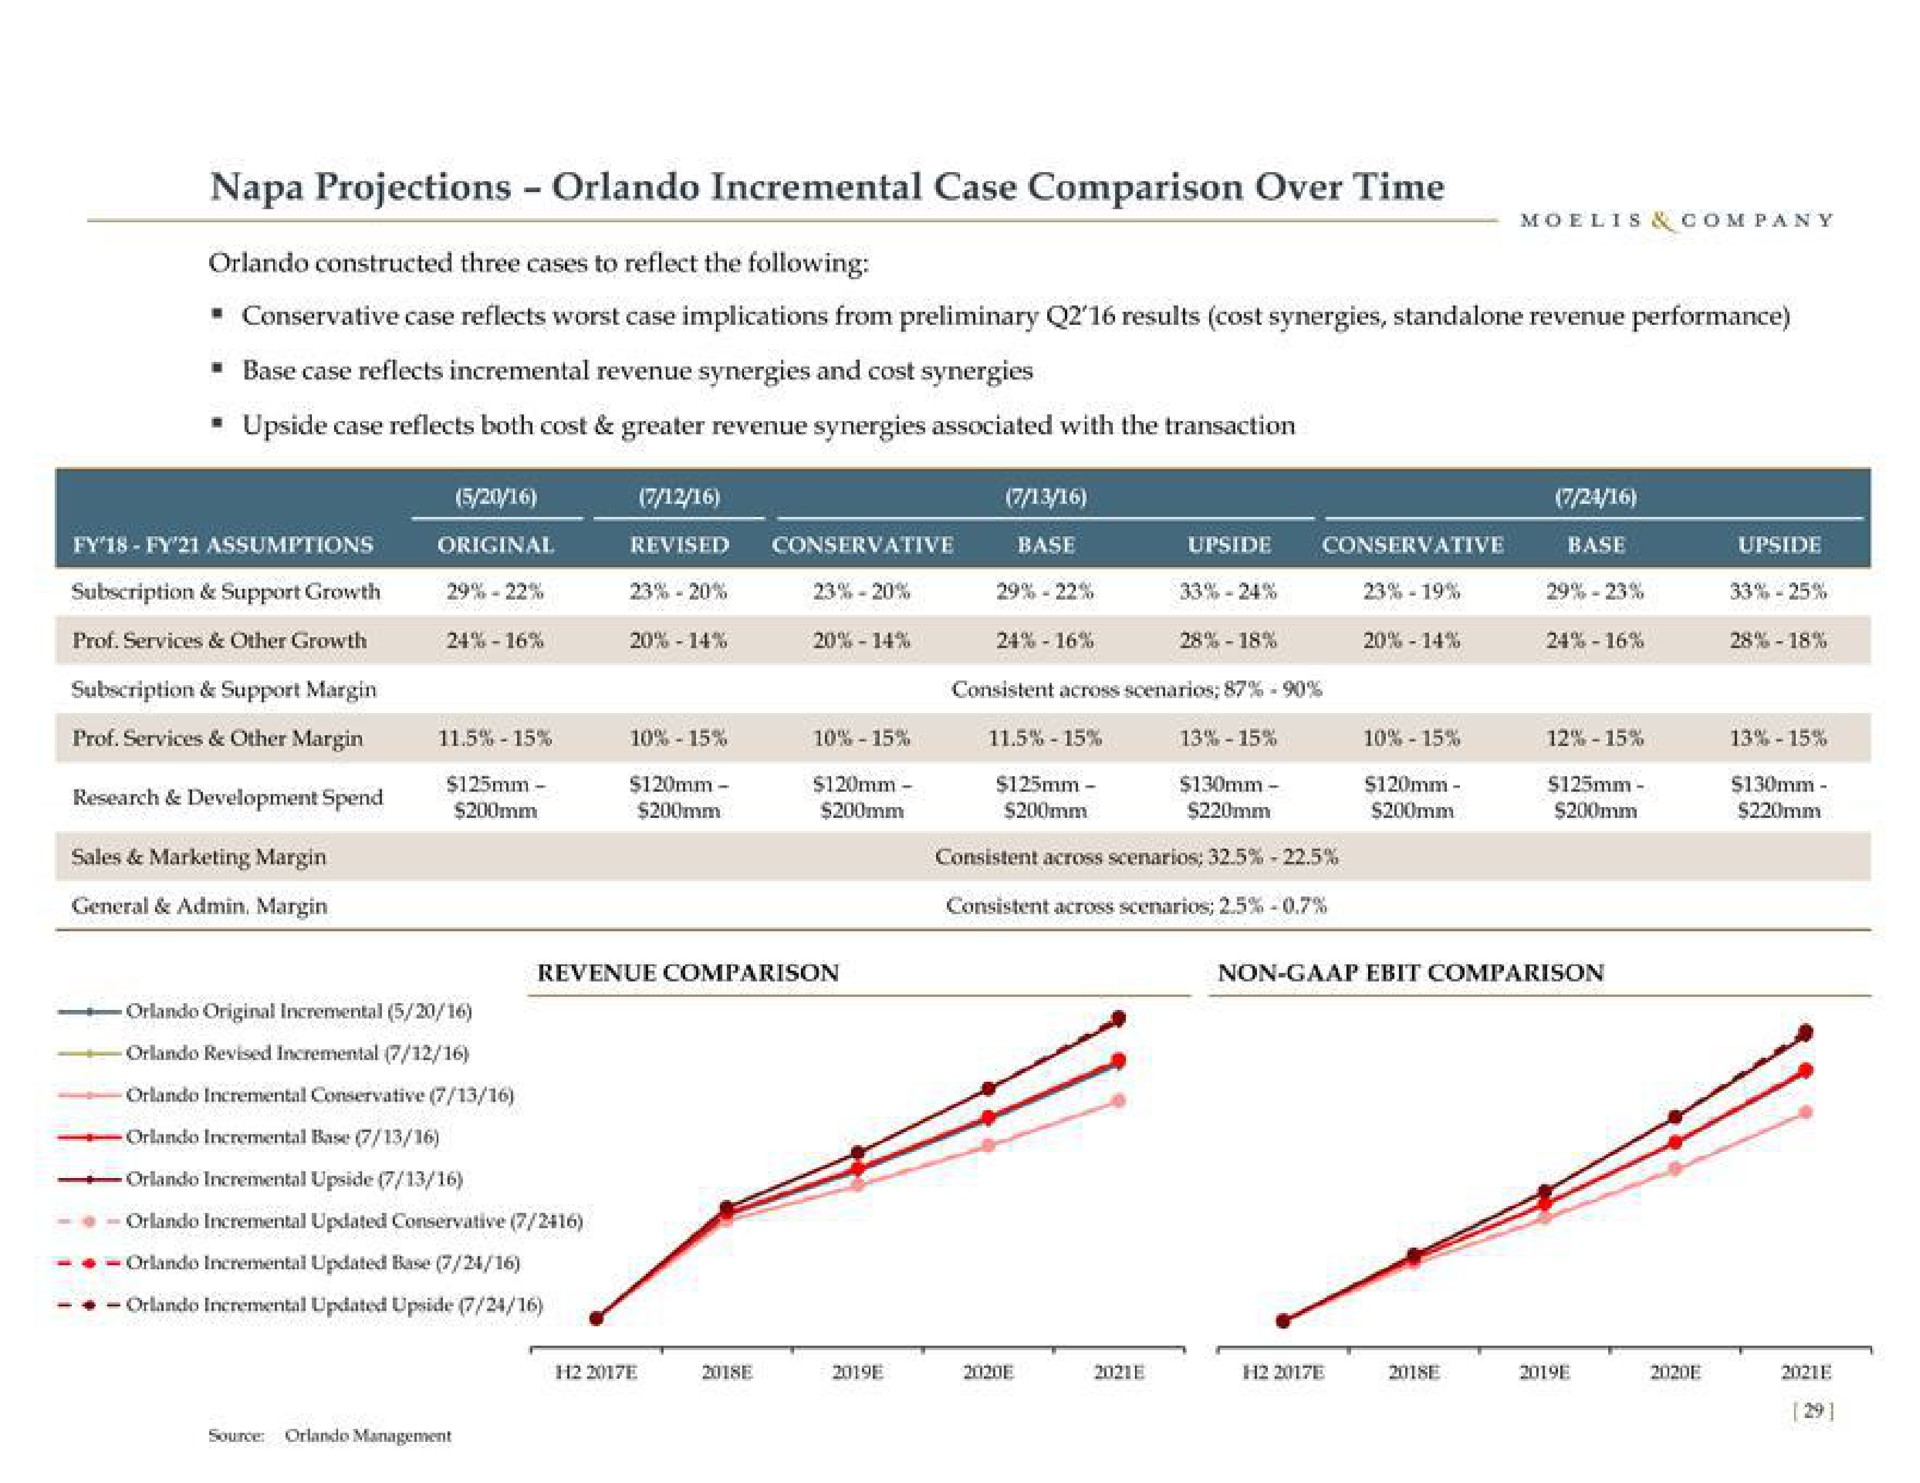 napa projections incremental case comparison over time | Moelis & Company